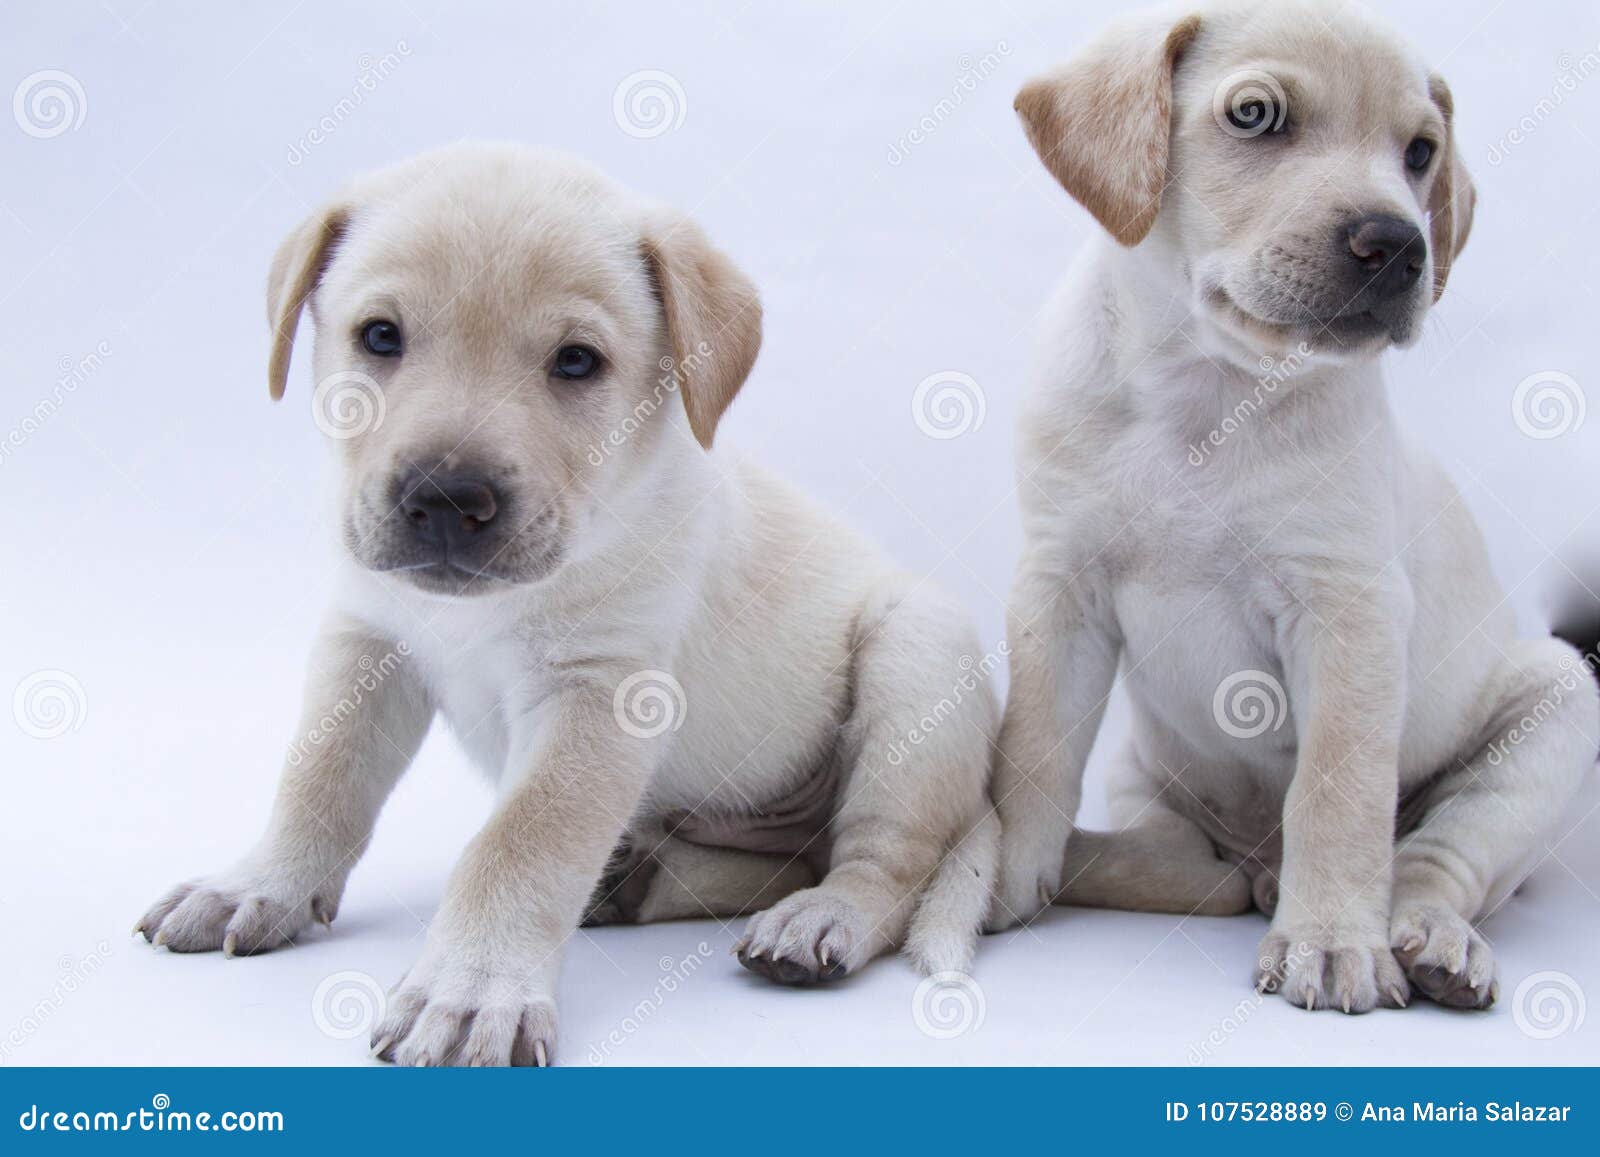 two brothers, white puppy on background white